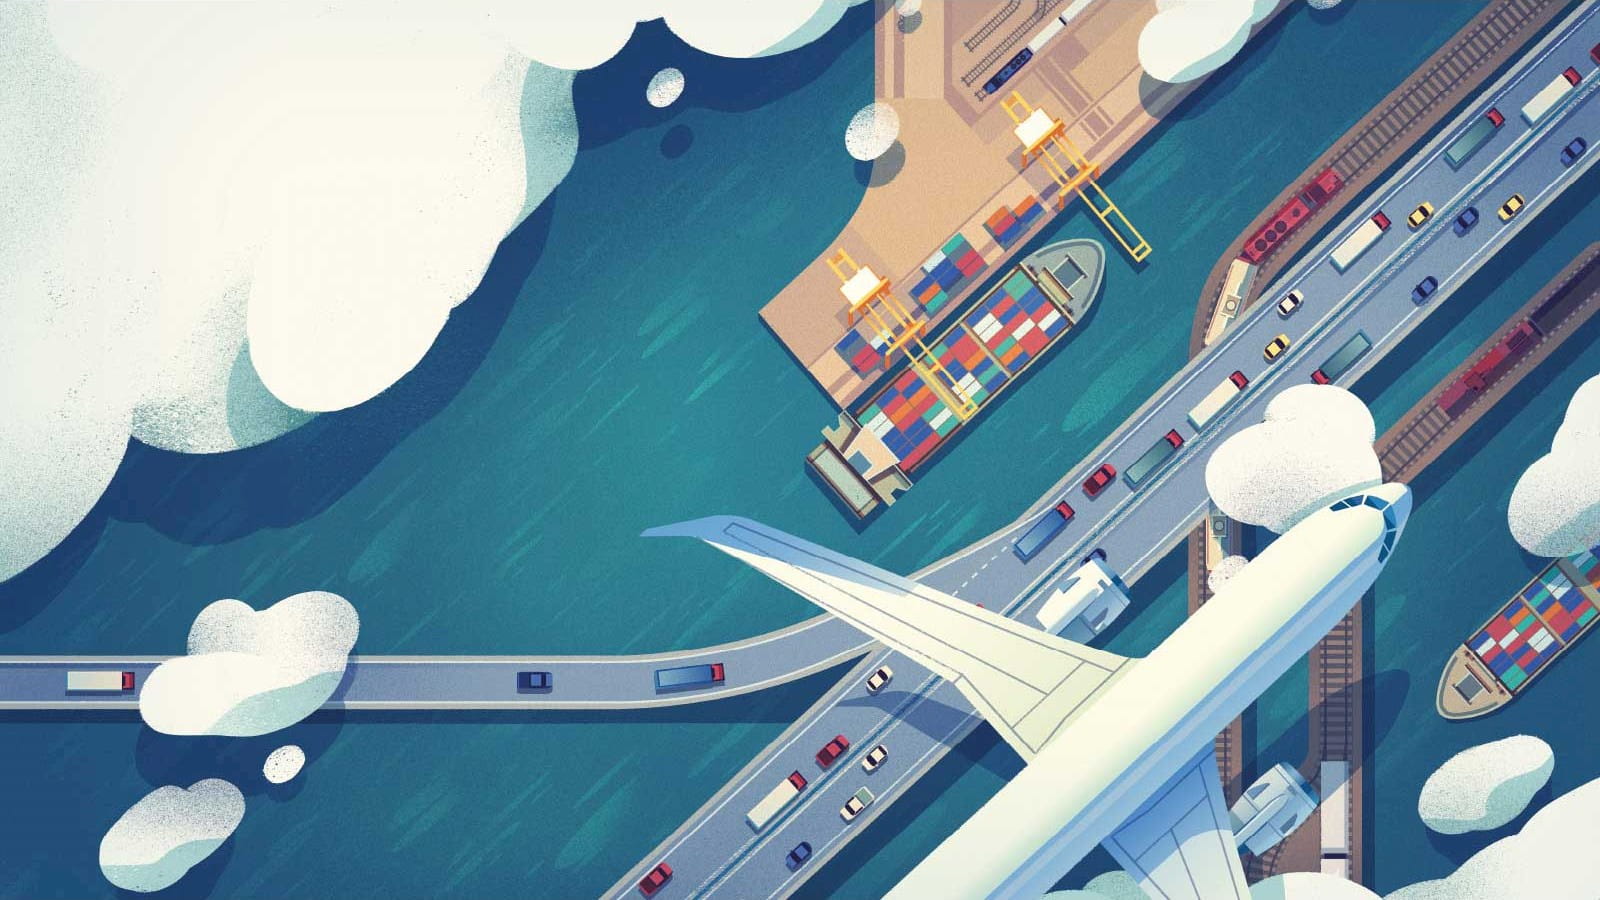 An illustration of a plane flying over a road, shipping yard and cargo ships.